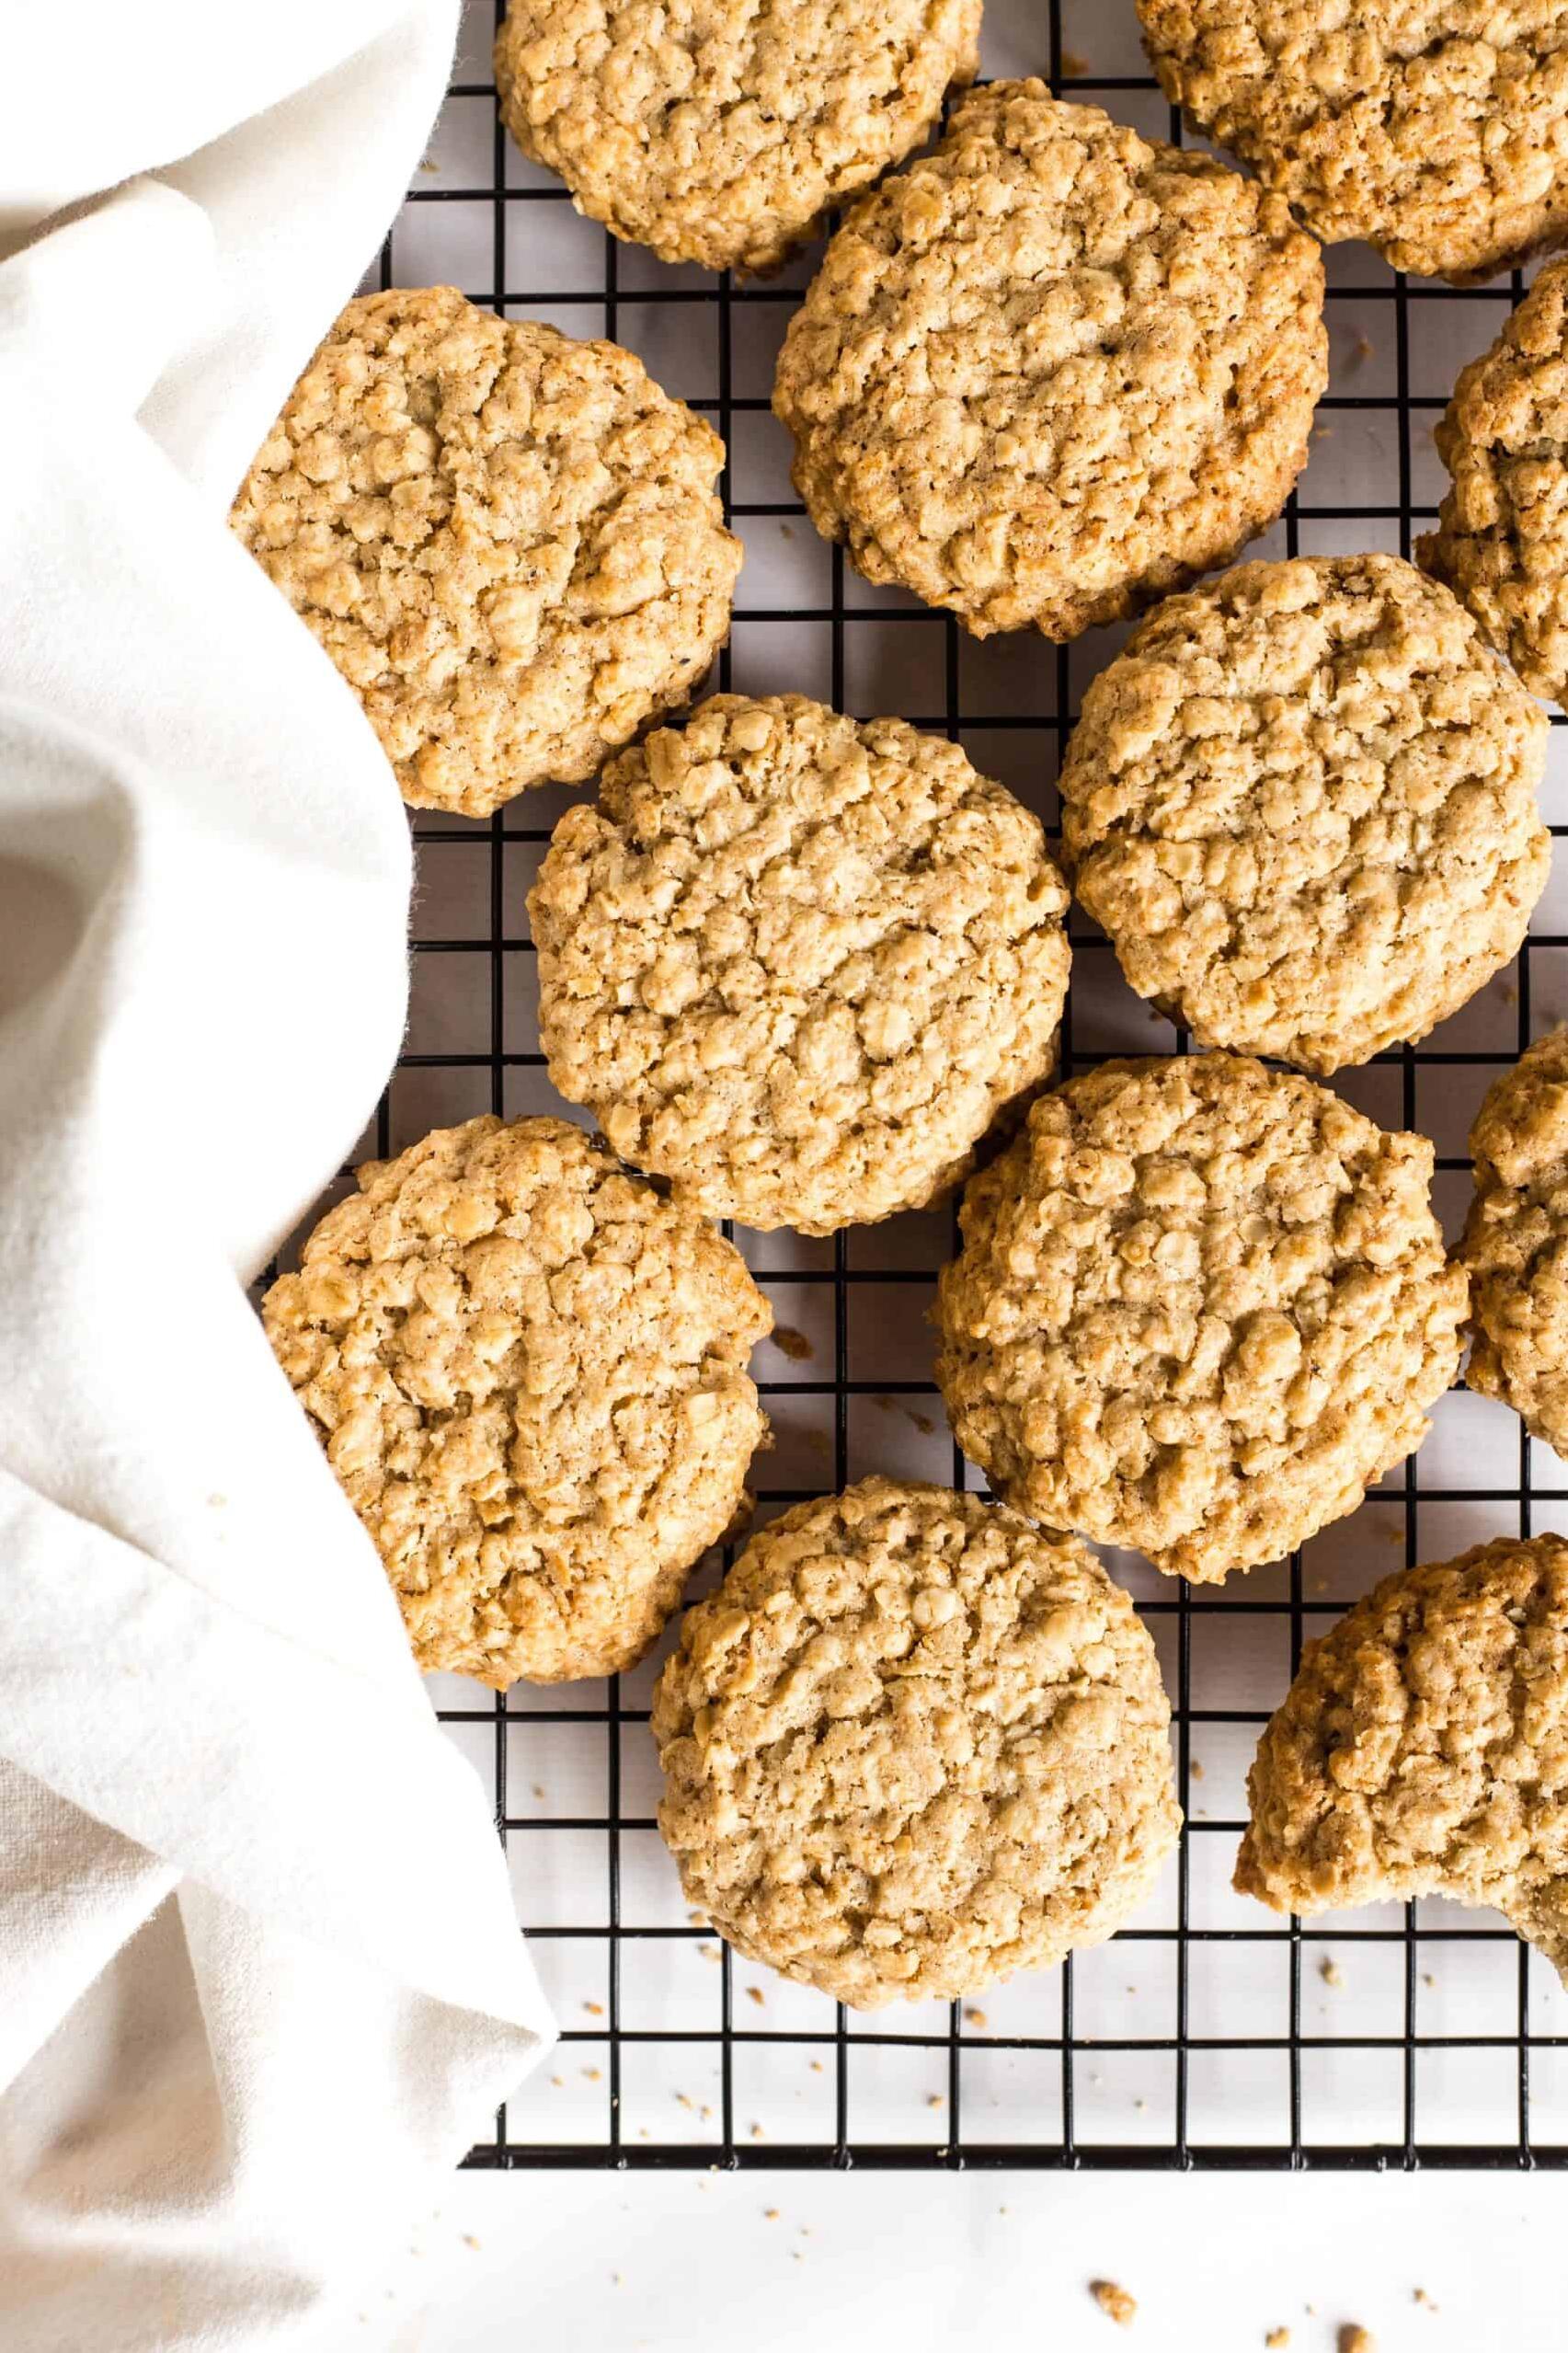  Enjoy these scrumptious oatmeal cookies without any stomach aches or worries.